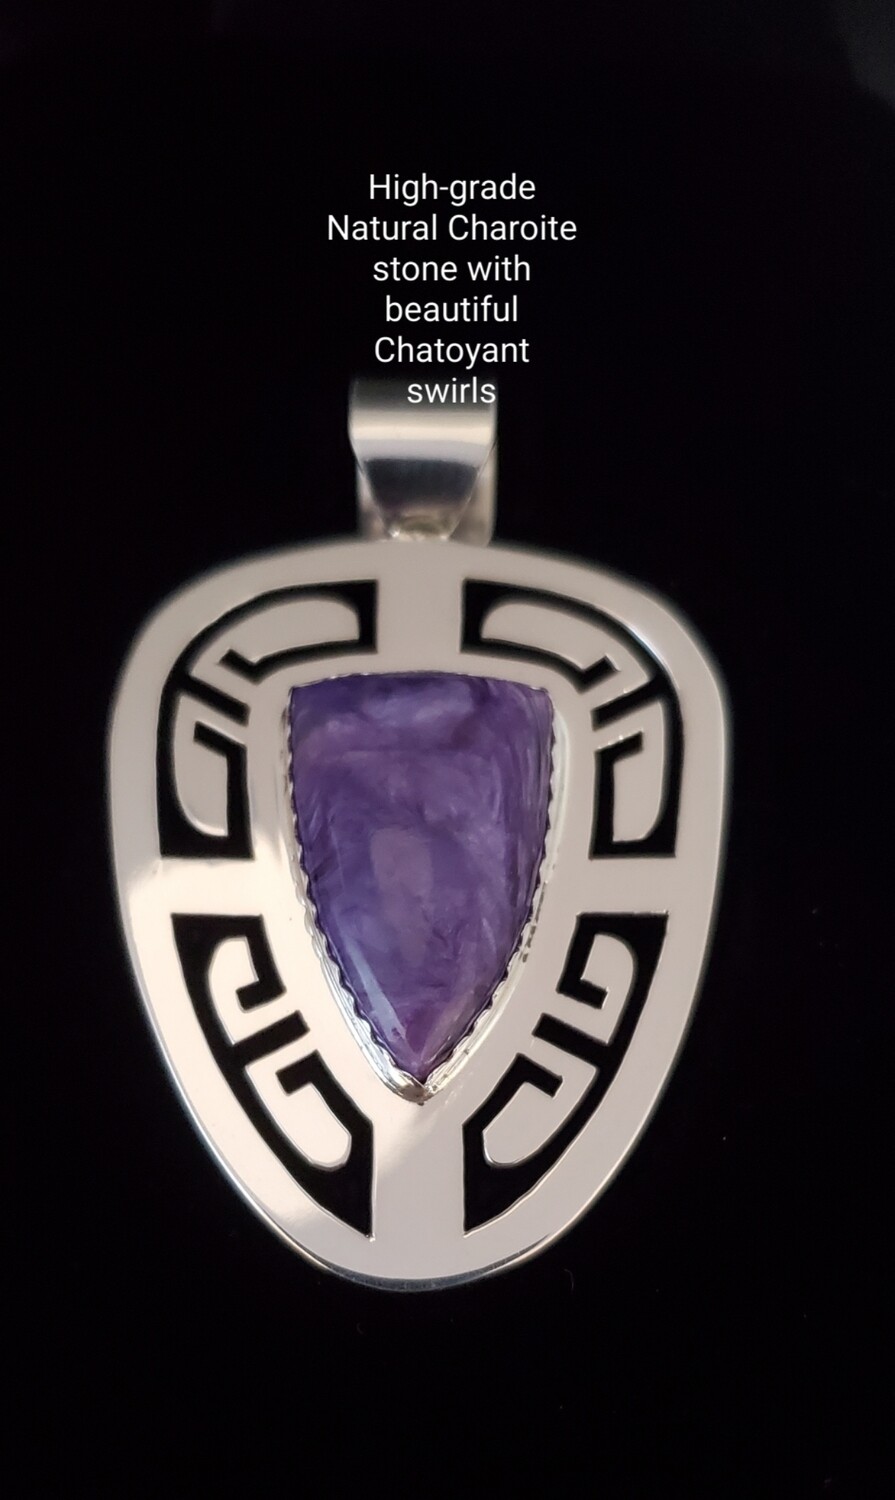 Sterling silver "cutout" Pendant with high-quality natural Charoite stone